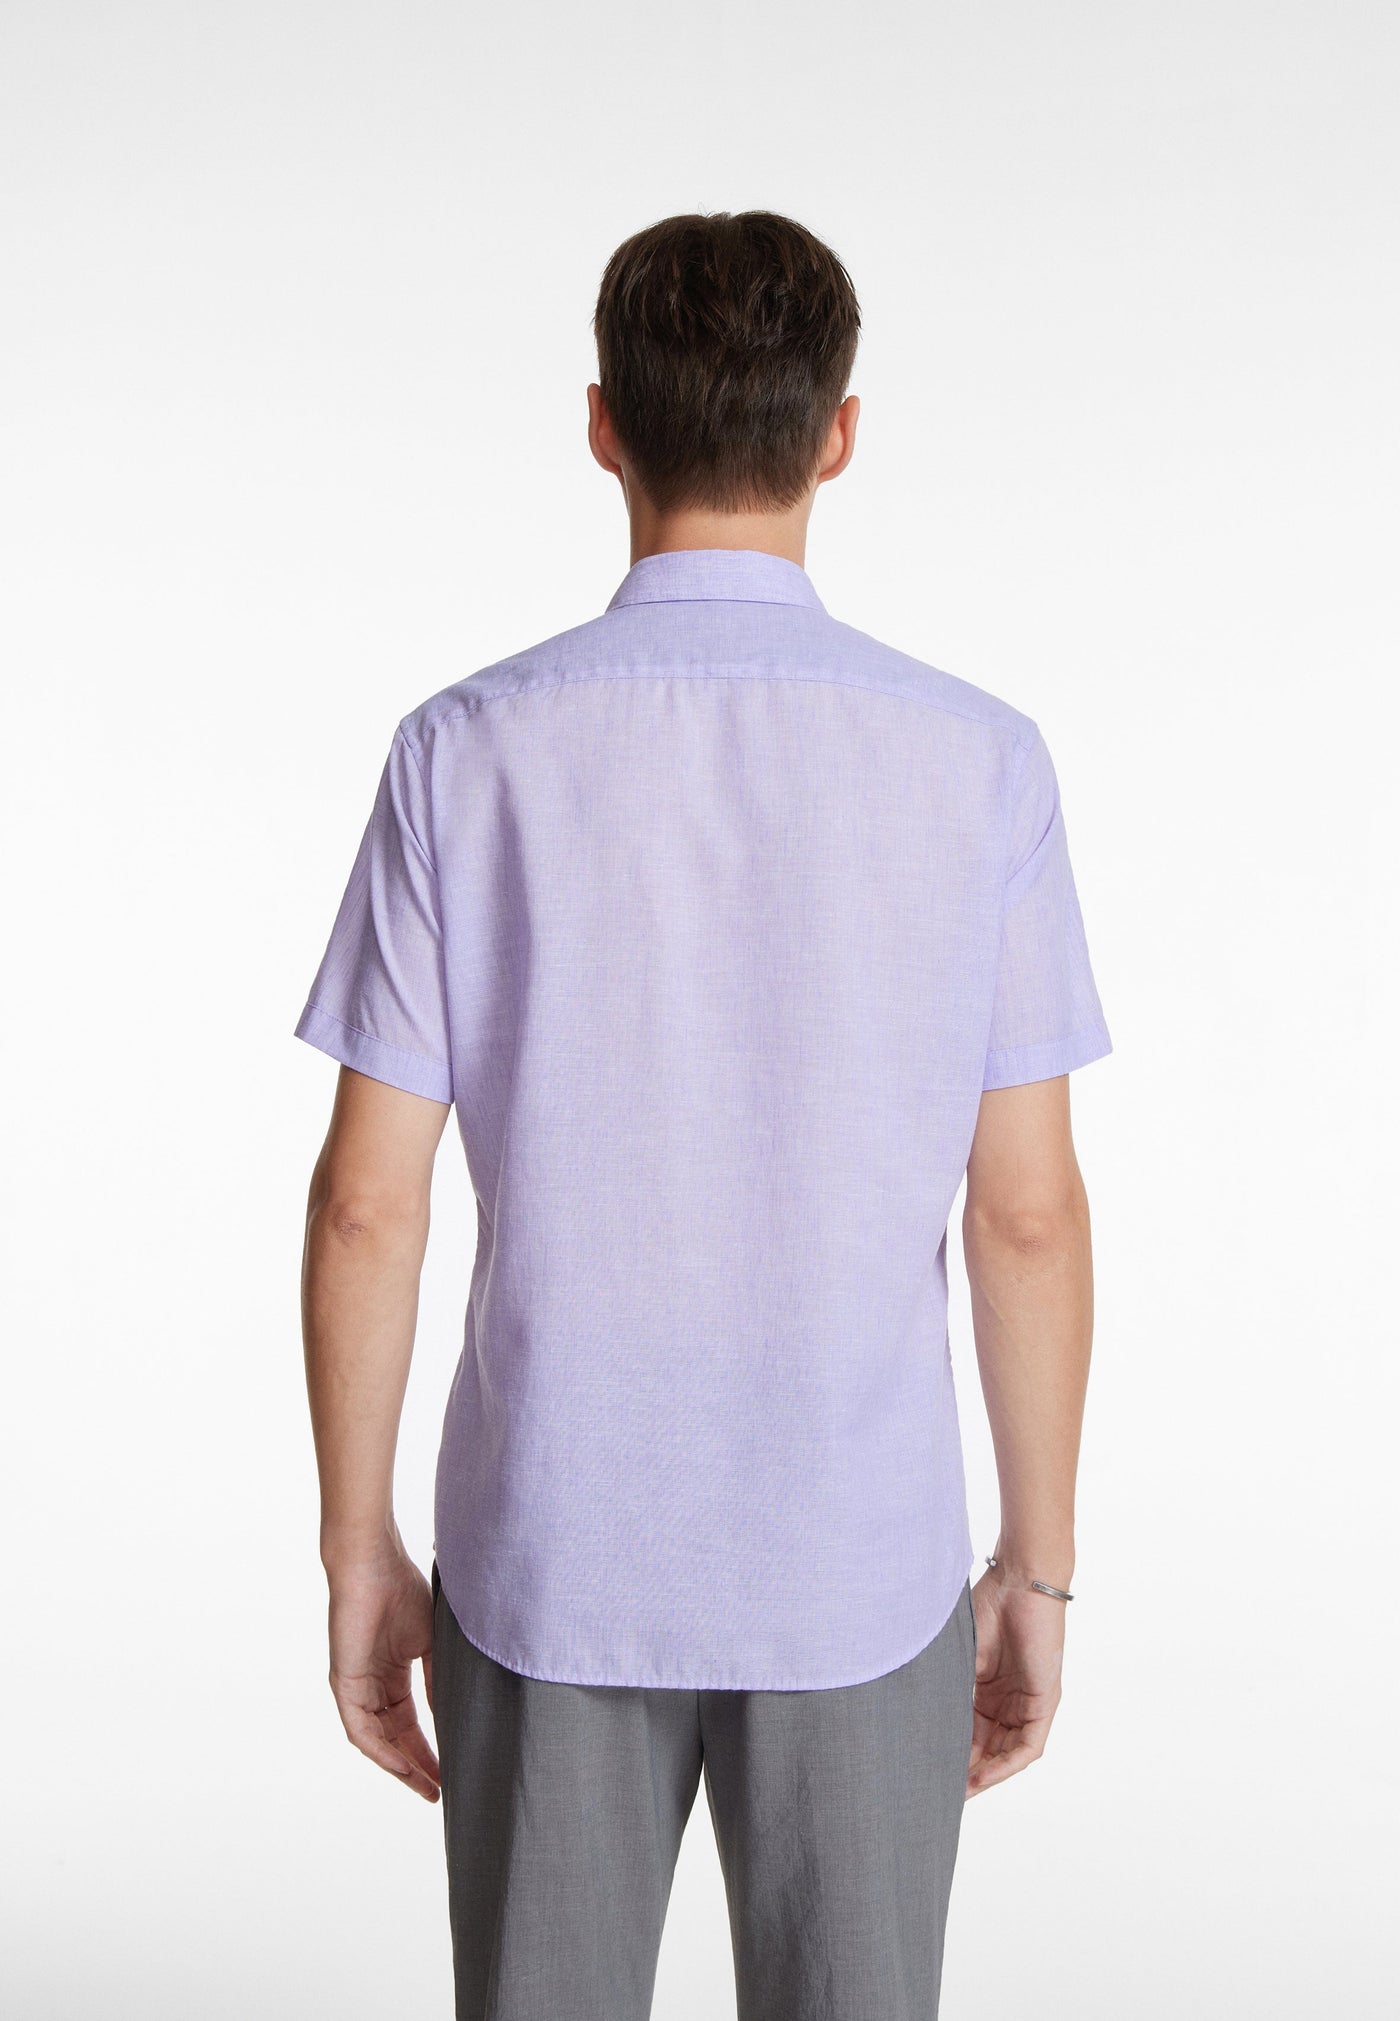 Menlinply Shirt With Tape Pocket Smart Fit